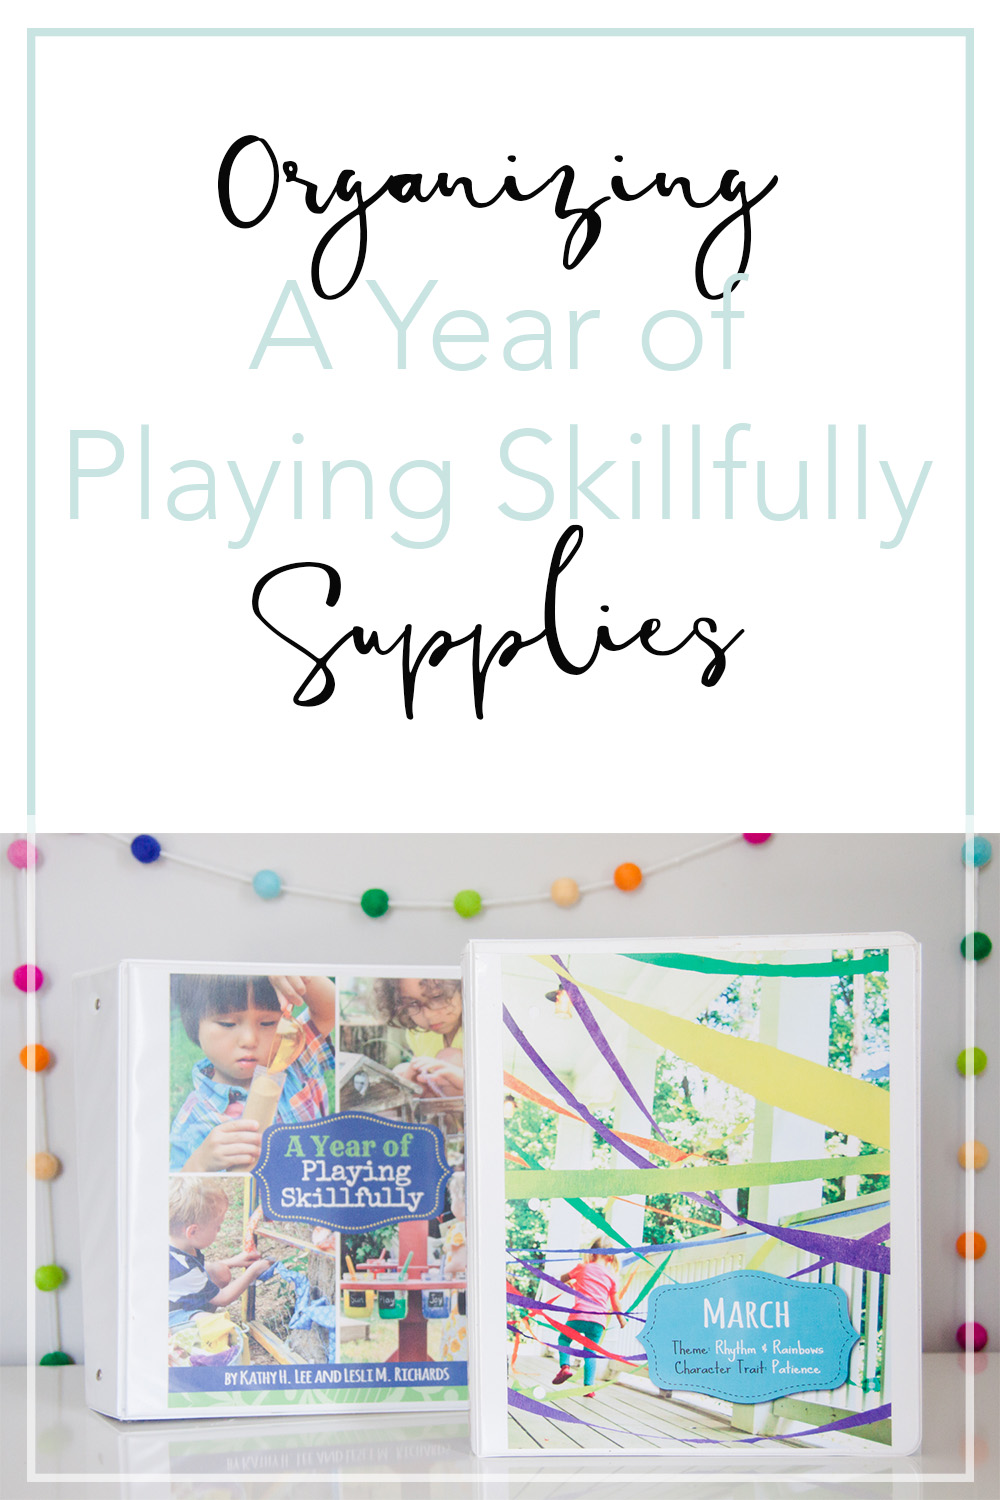 Organizing A Year of Playing Skillfully Supplies